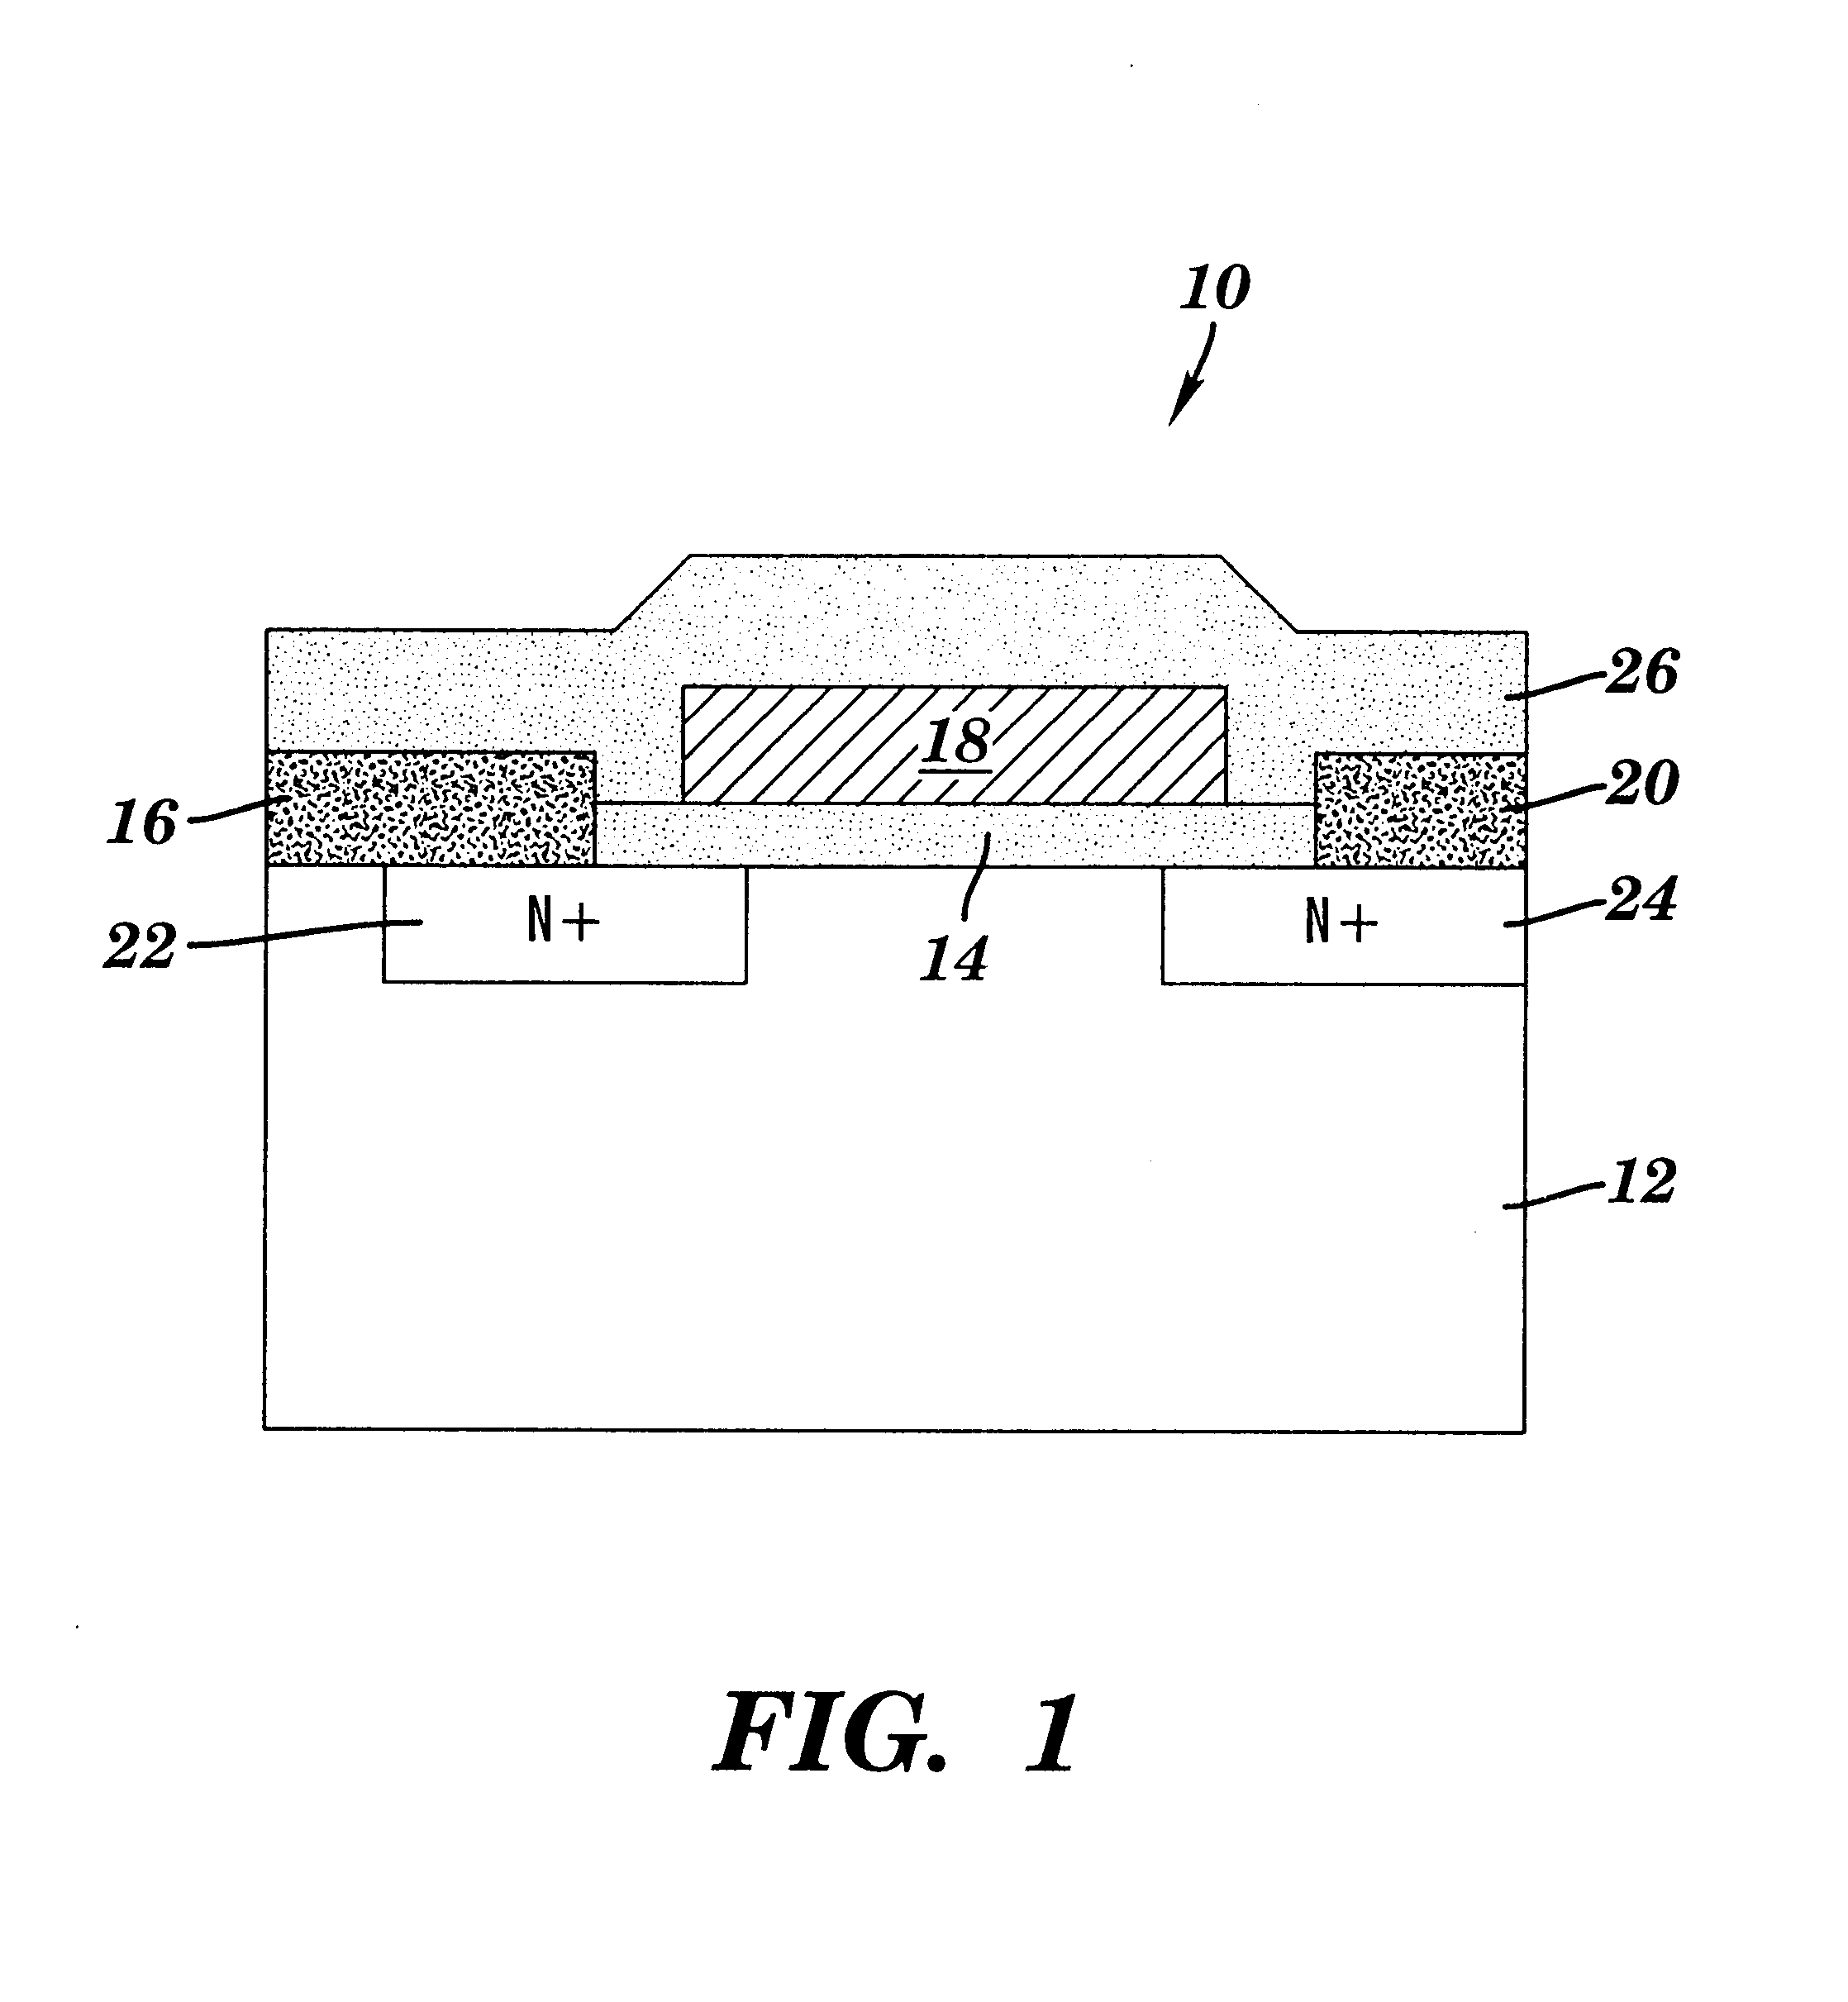 Method for improving inversion layer mobility in a silicon carbide metal-oxide semiconductor field-effect transistor